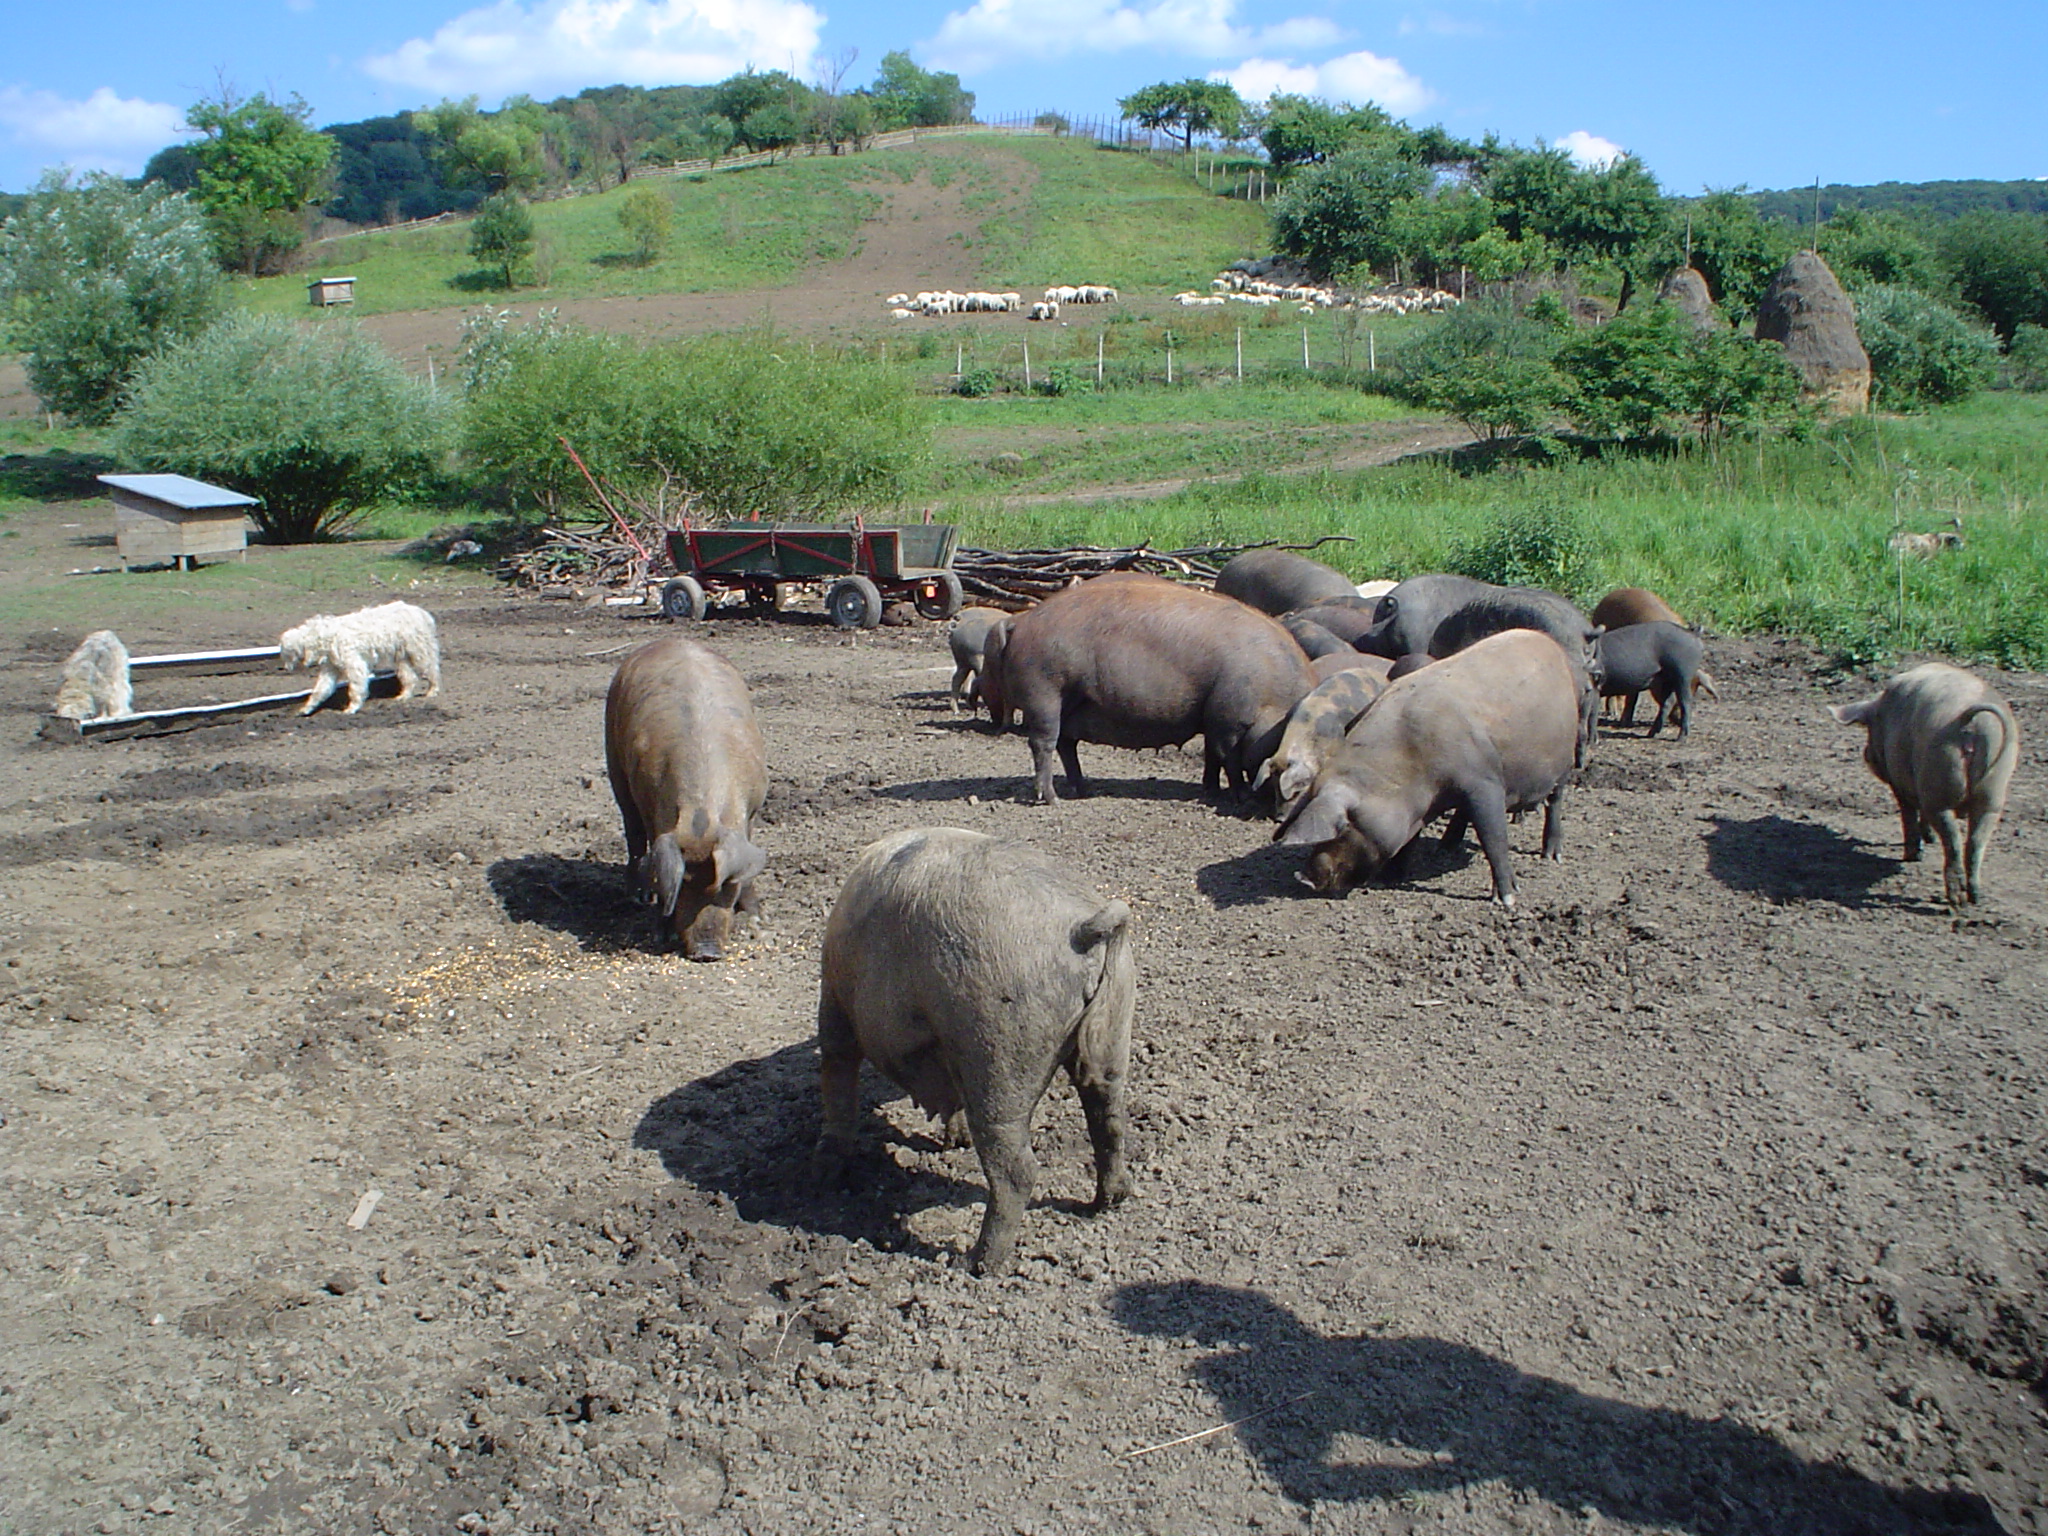 pigs outdoors grazing